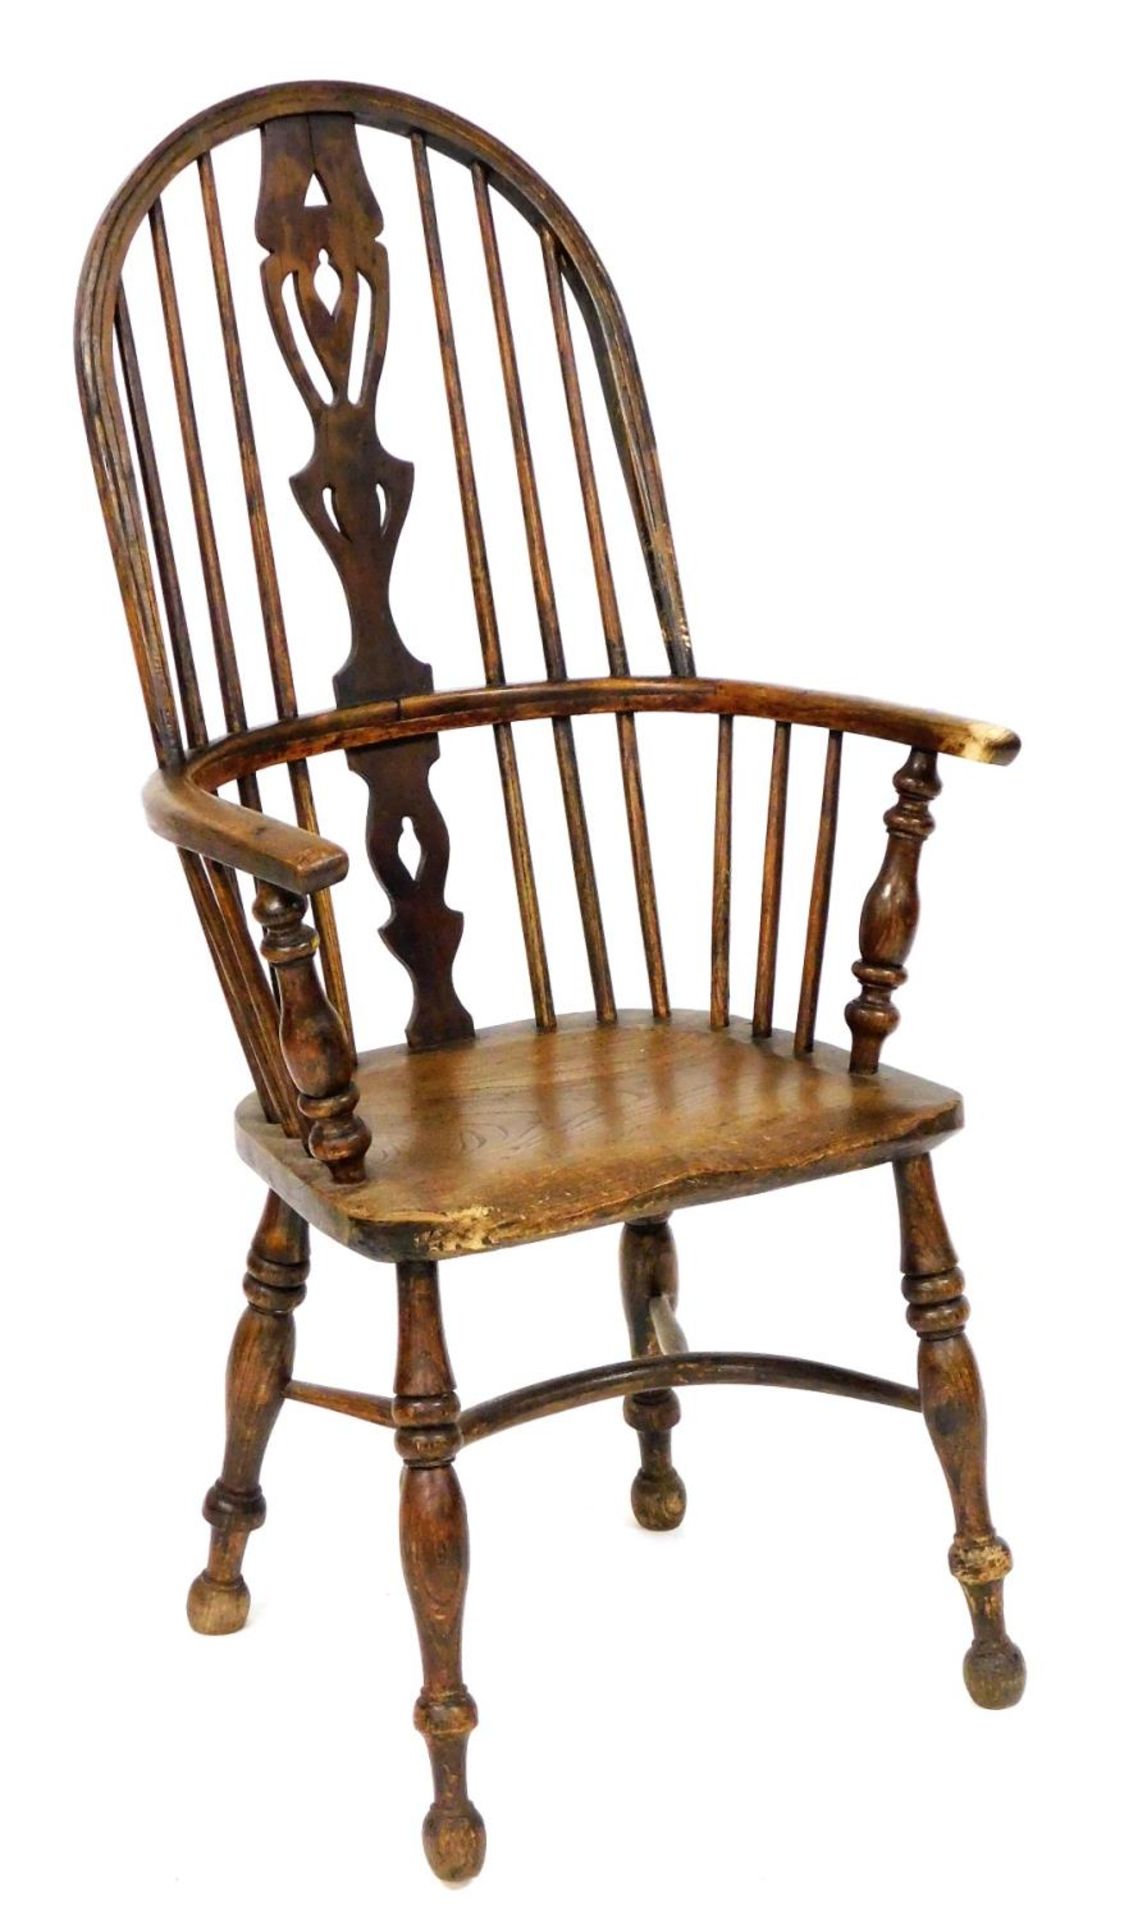 A 19thC oak and elm Windsor chair, with hoop back, pierced vase splat, solid saddle seat, raised on